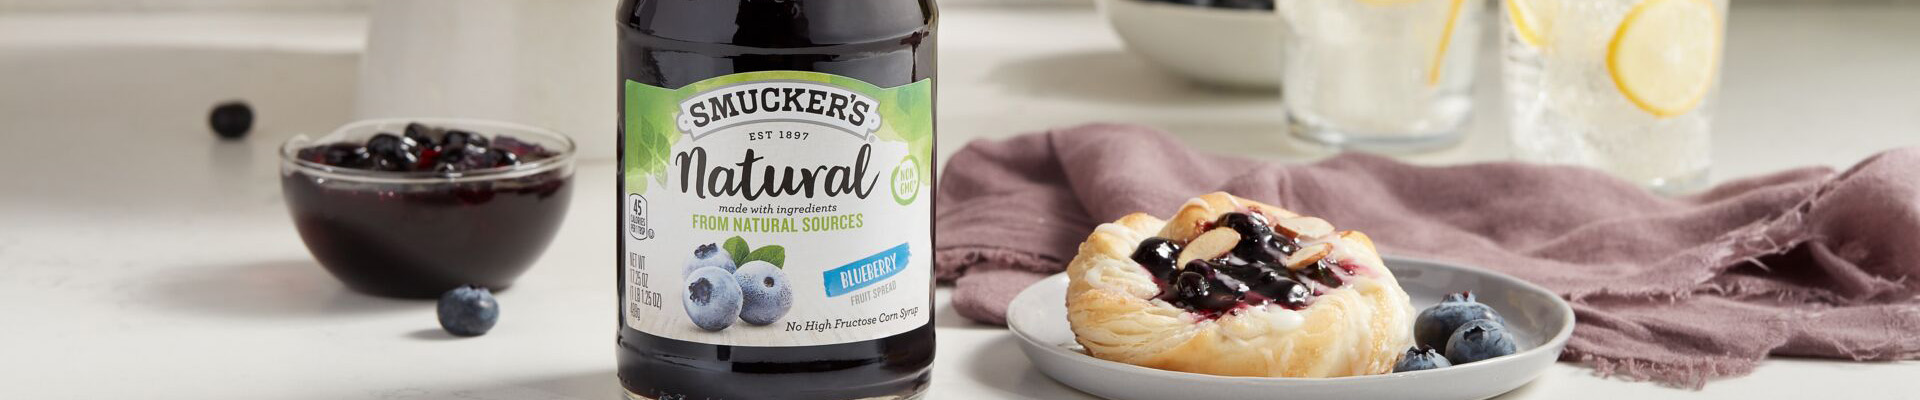 Smucker's PlateScapers  Smucker Foodservice Canada